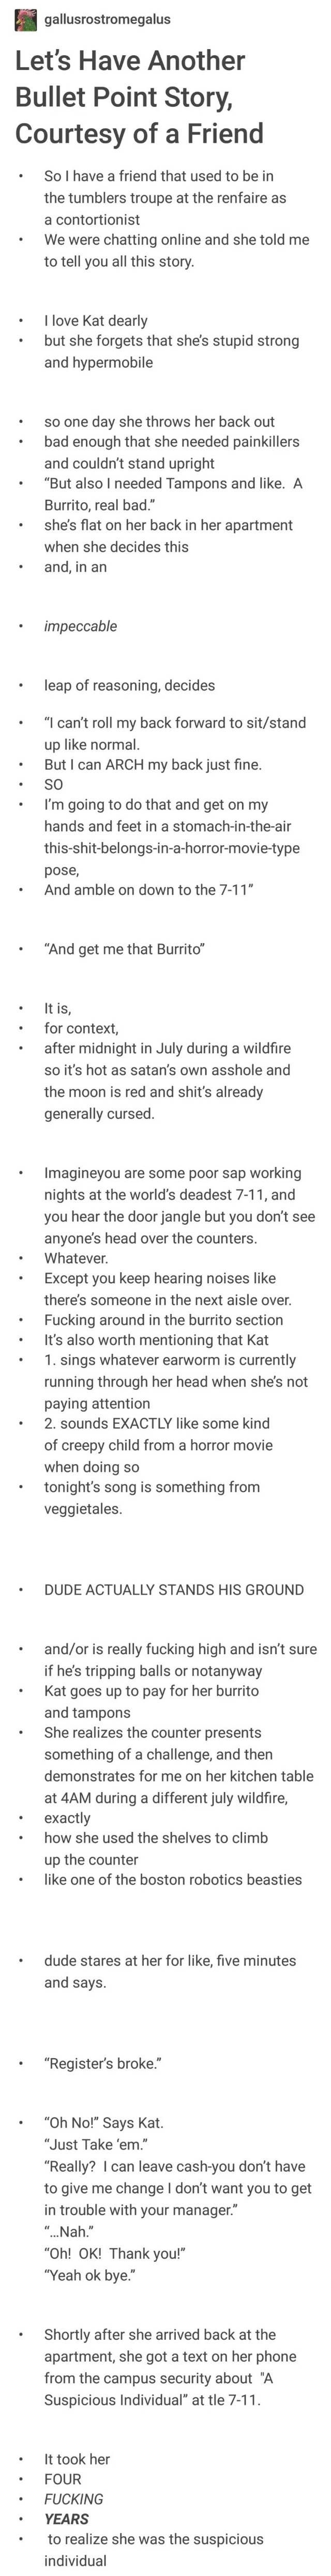 Tumblr Tells Some Wild Stories, And Here Are 19 Really Good Ones